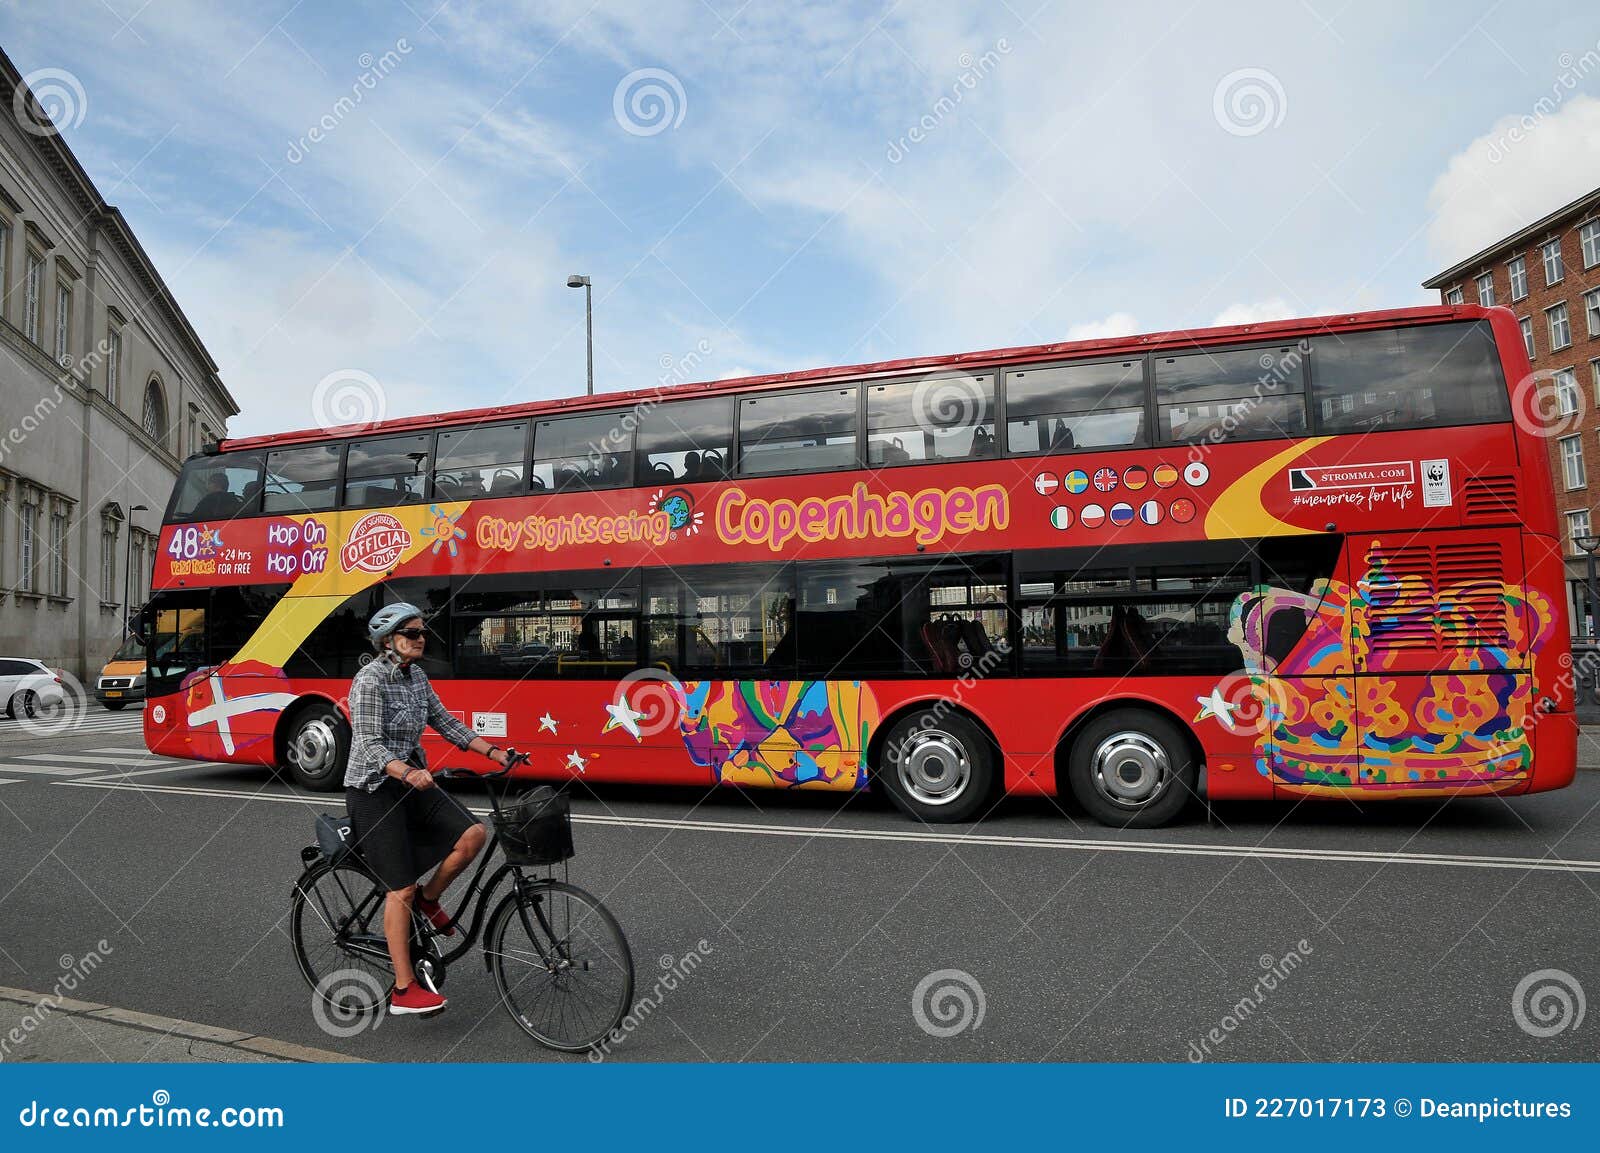 Canal Boat and Bus Hop Off Hop on Tourism in Editorial Stock Photo - Image of blue, coronavirus: